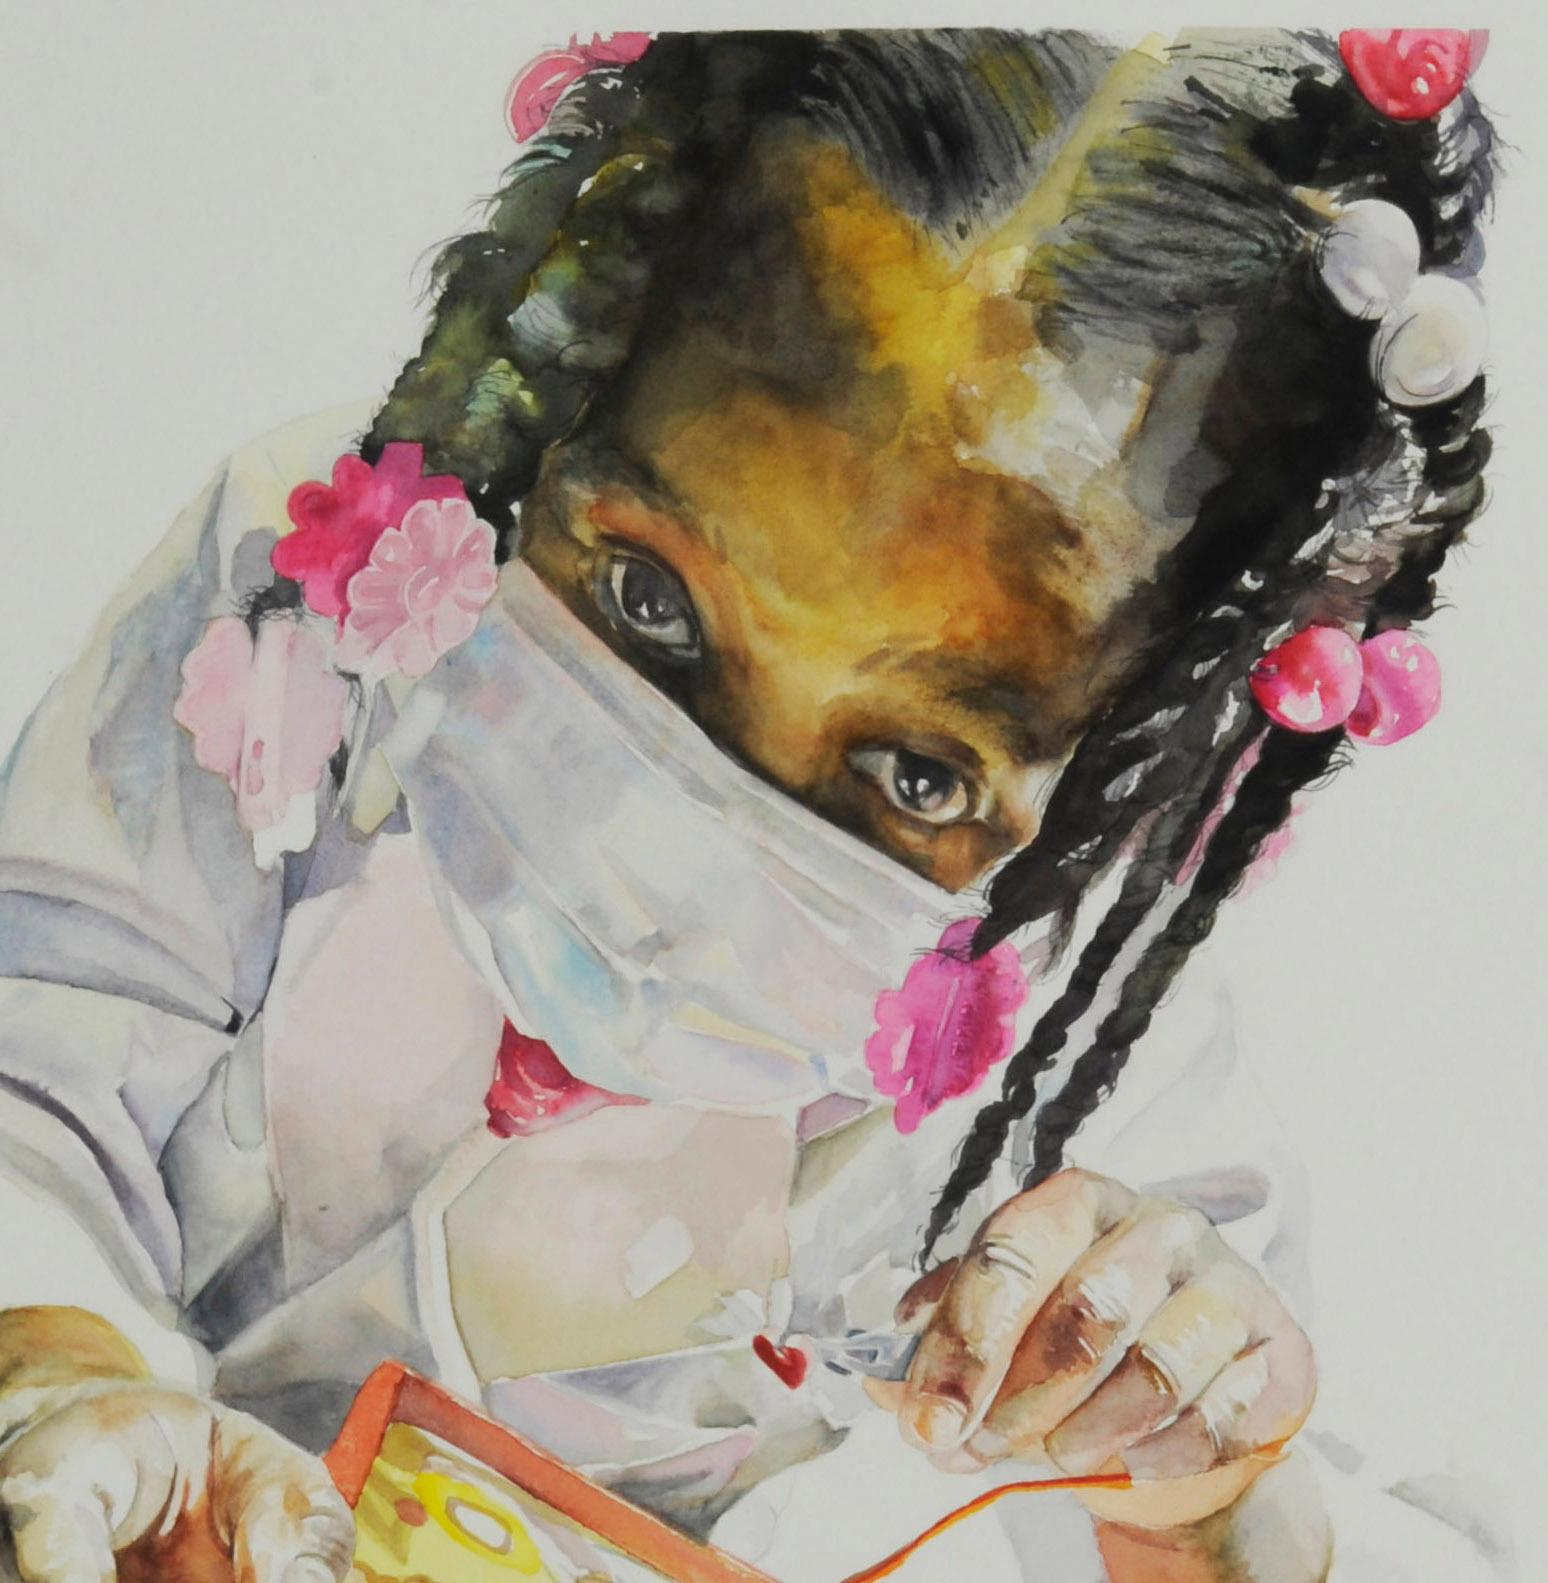 Playing with Lives (First Responder)  - Contemporary Art by Darius Steward